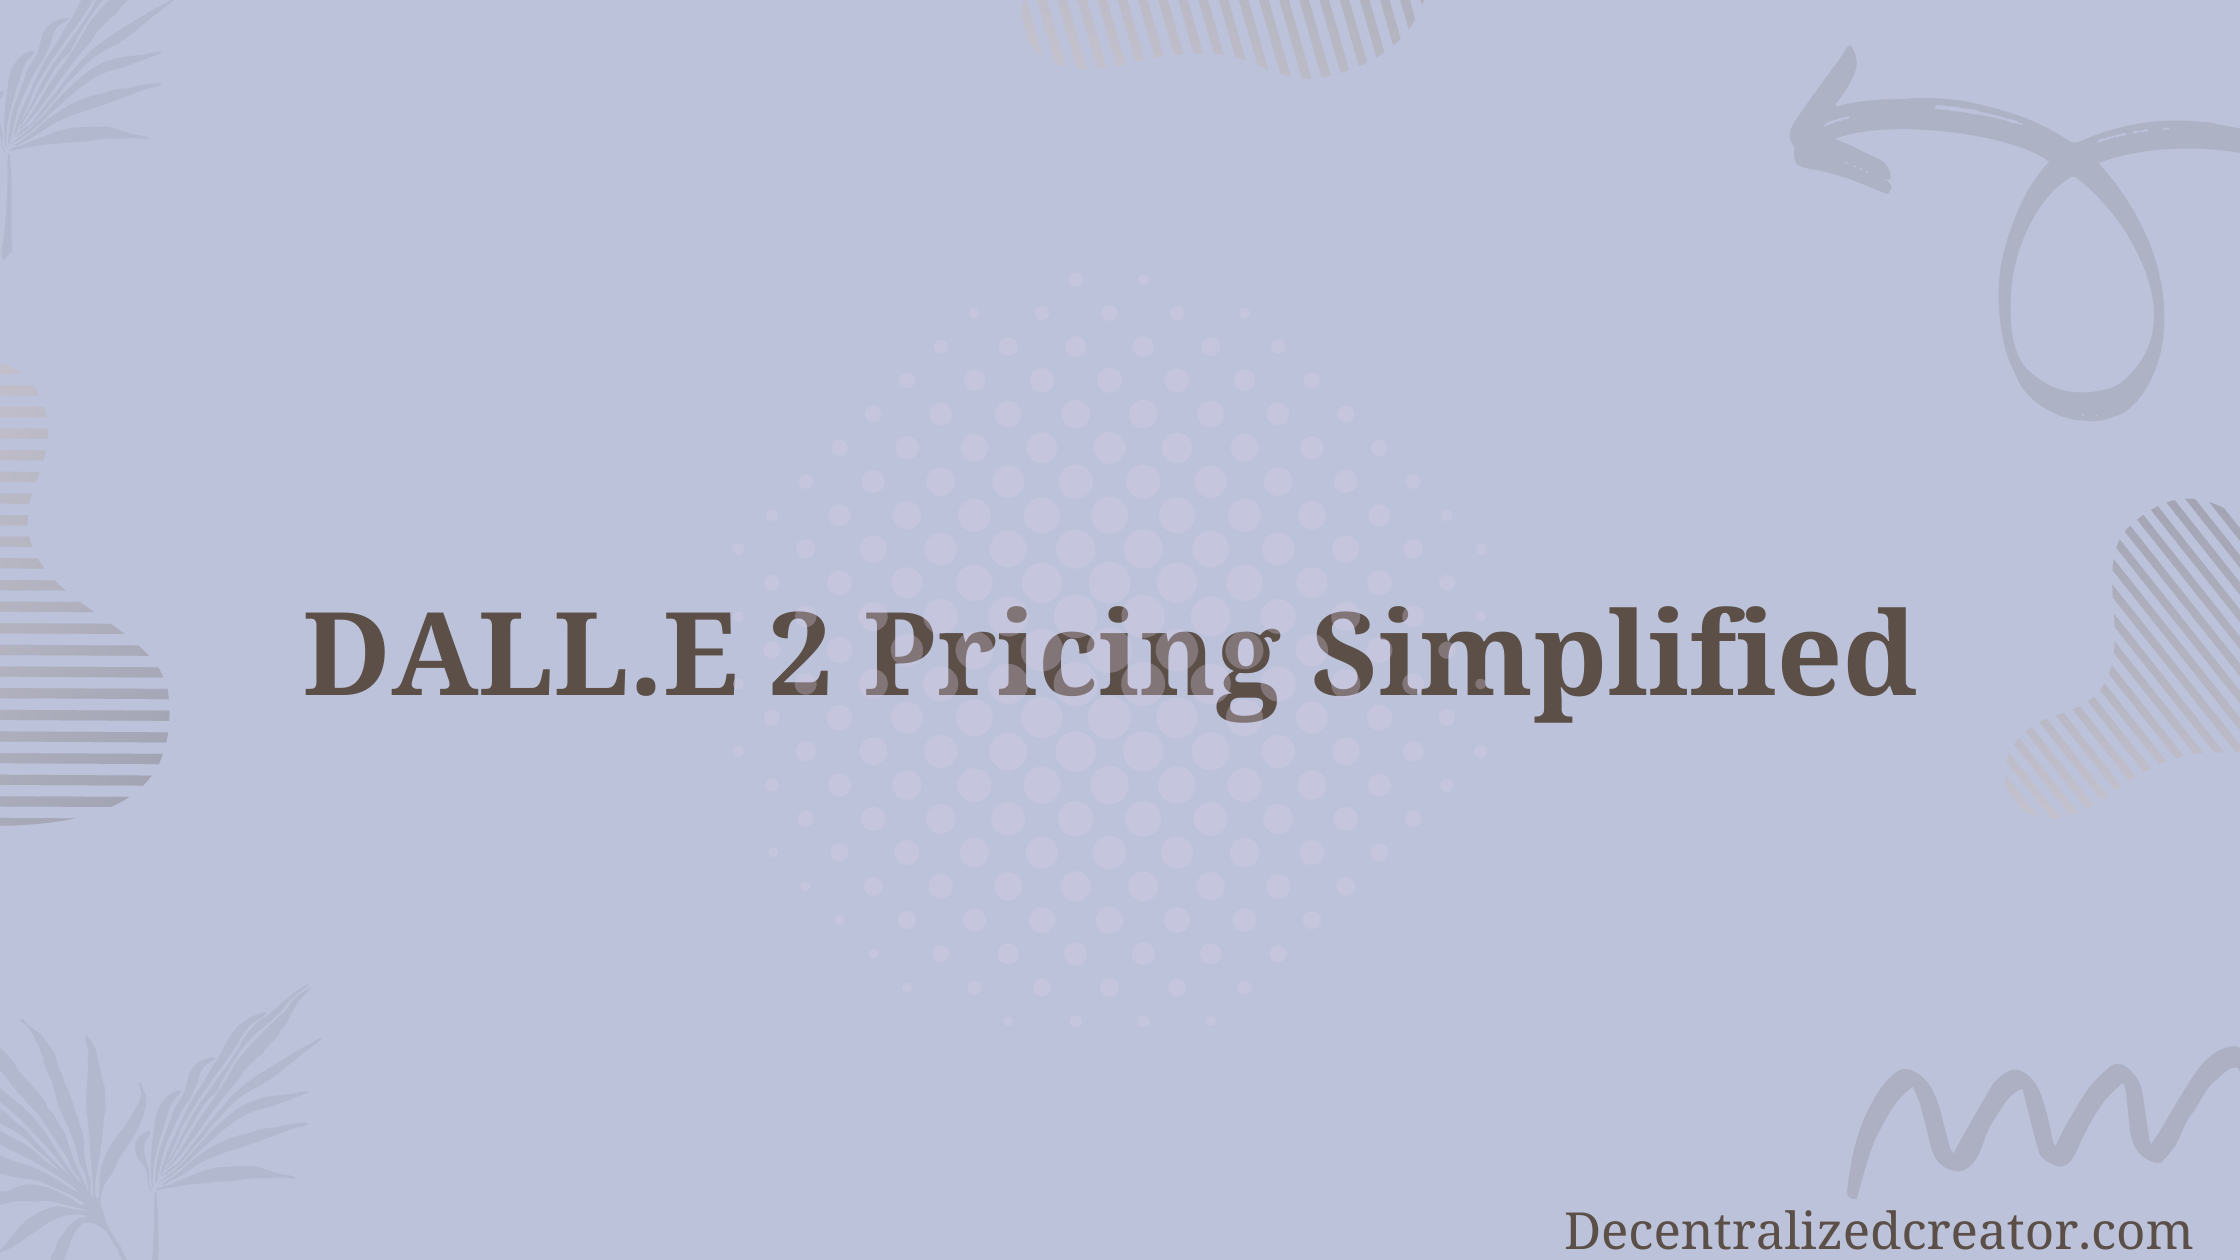 DALL.E 2 Pricing Simplified